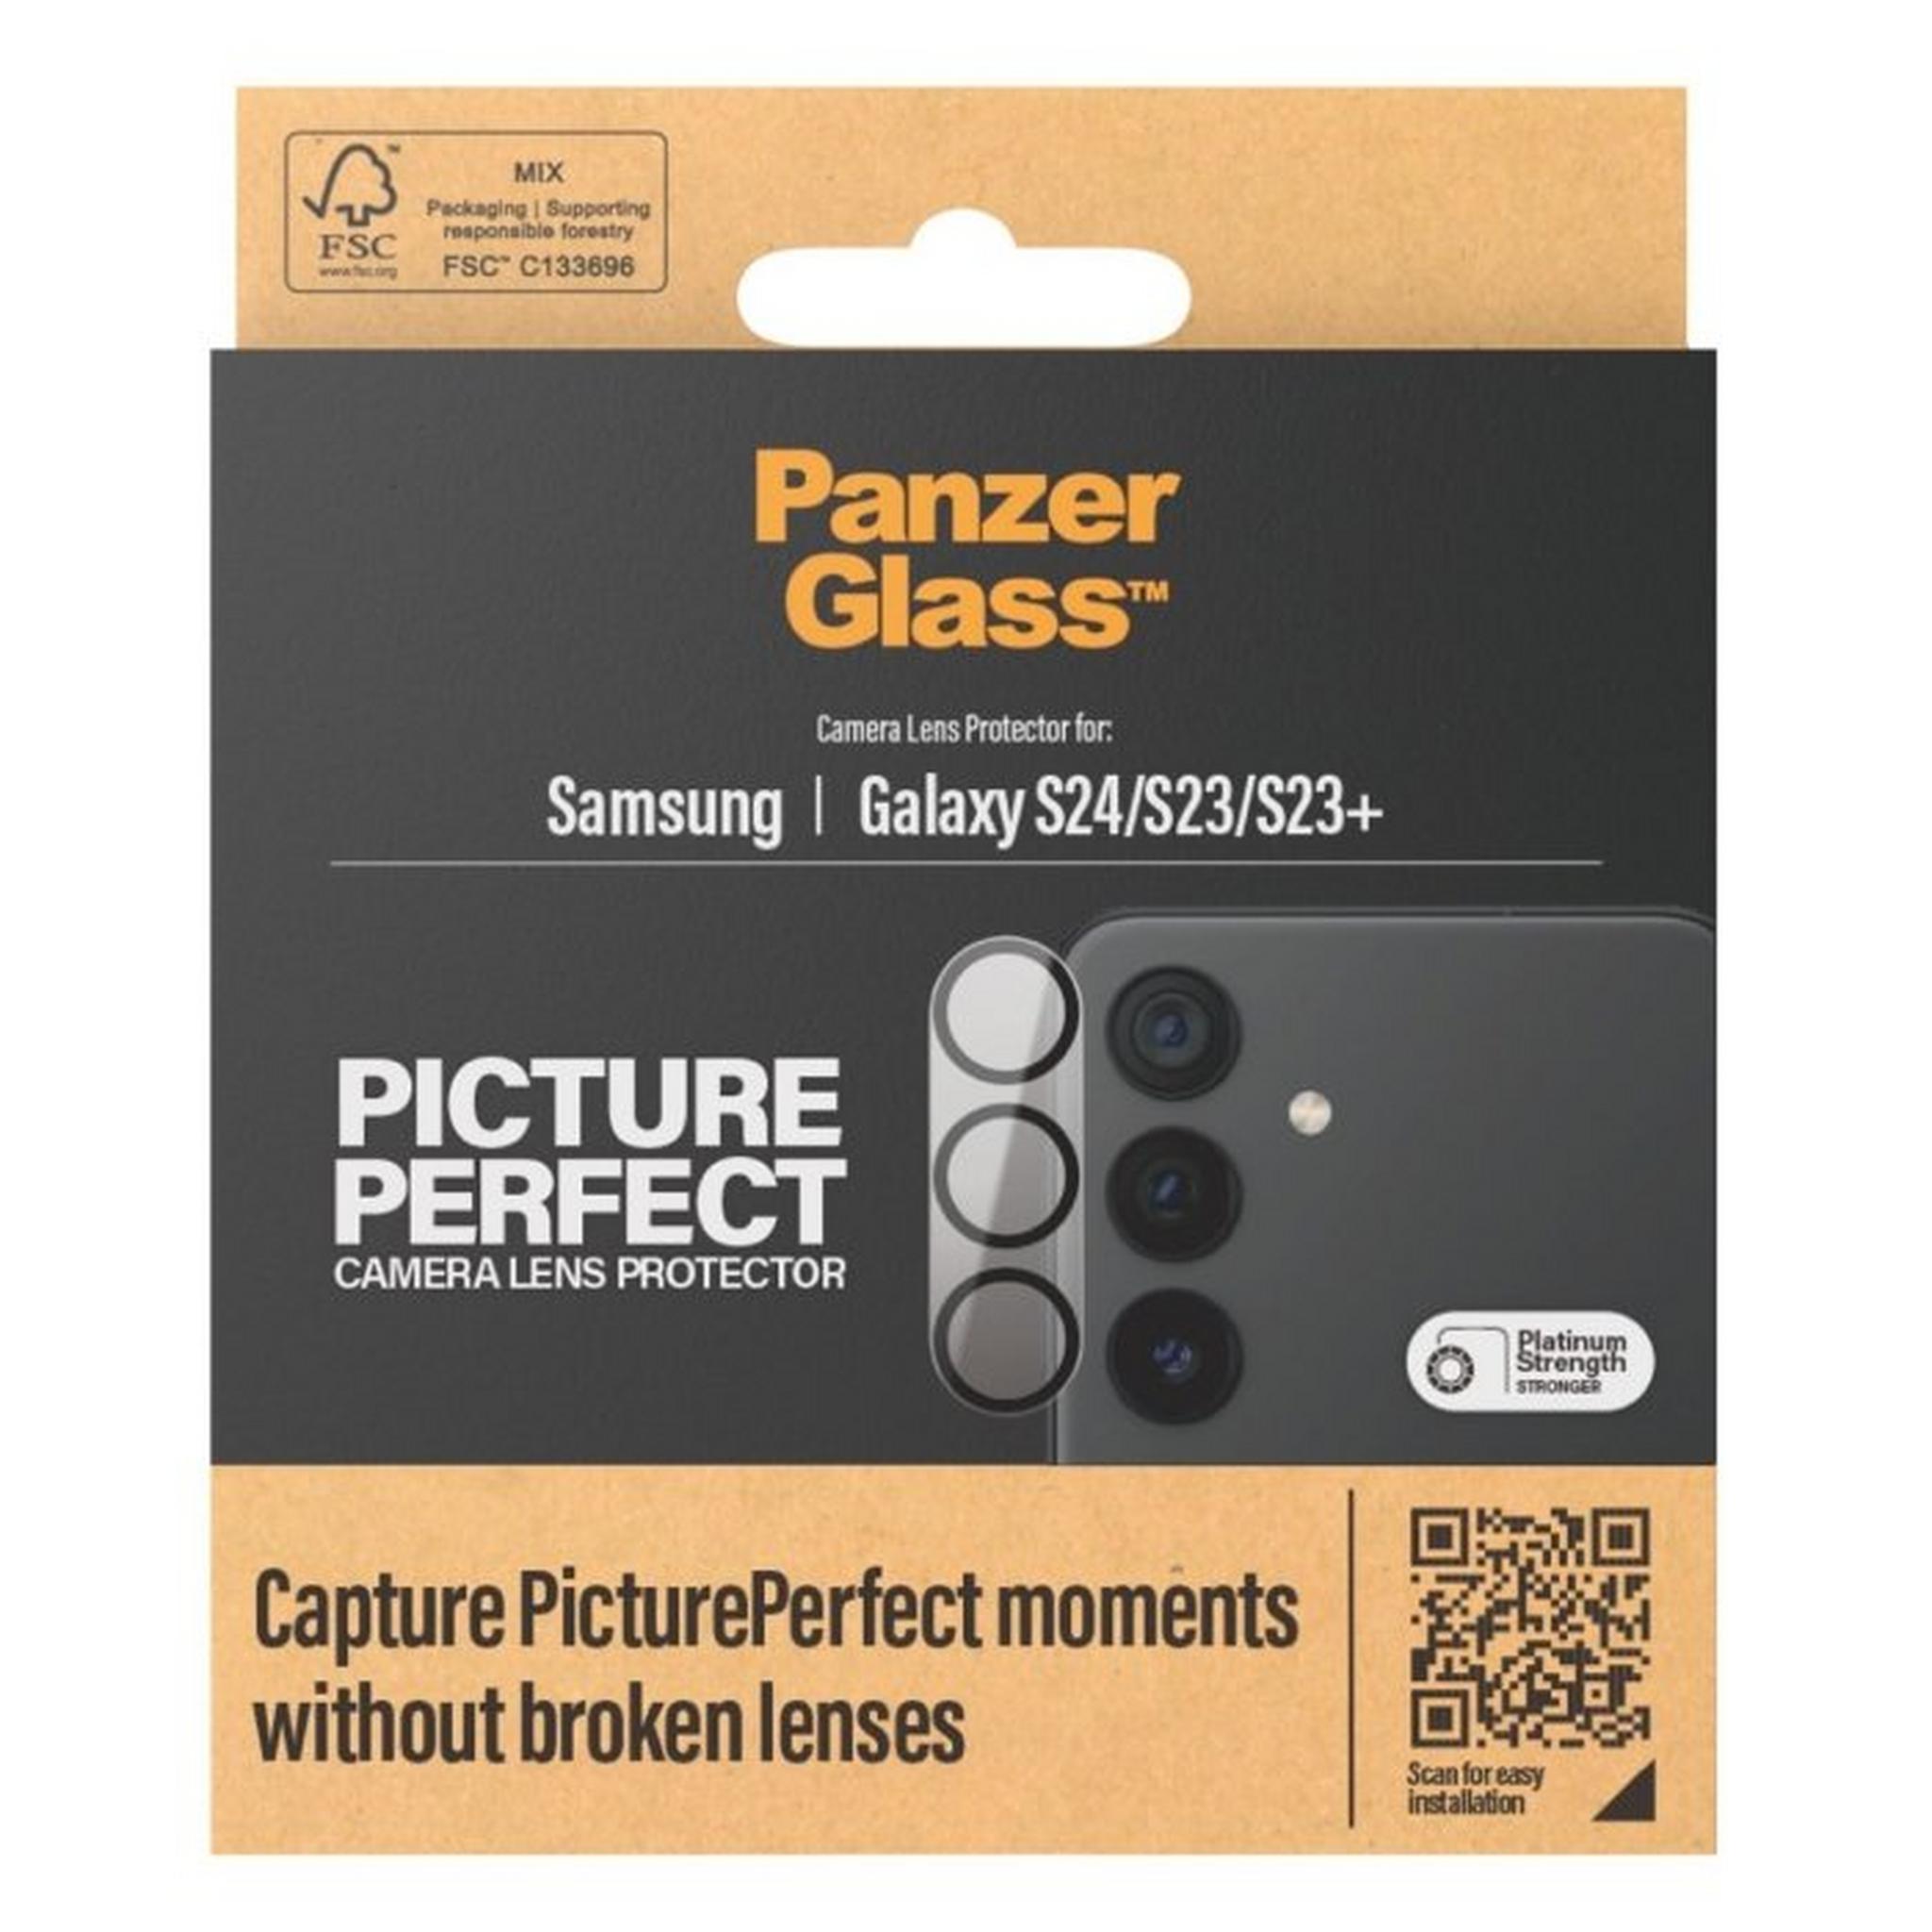 PANZER Glass Picture perfect Camera Lens Protector for Samsung Galaxy S24, 1204